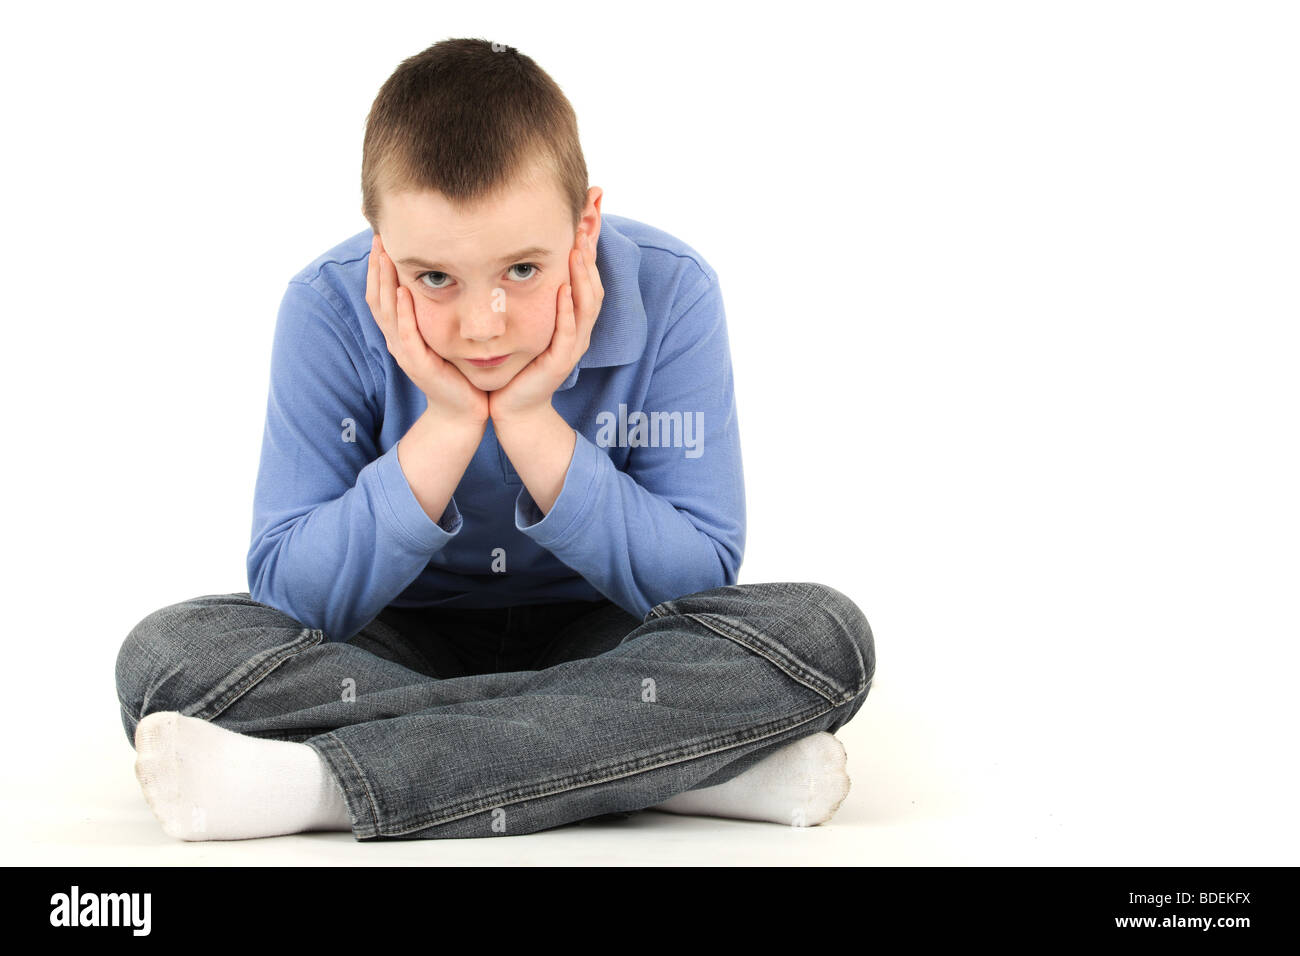 Portrait of young boy resting hand on chin against white background Stock Photo